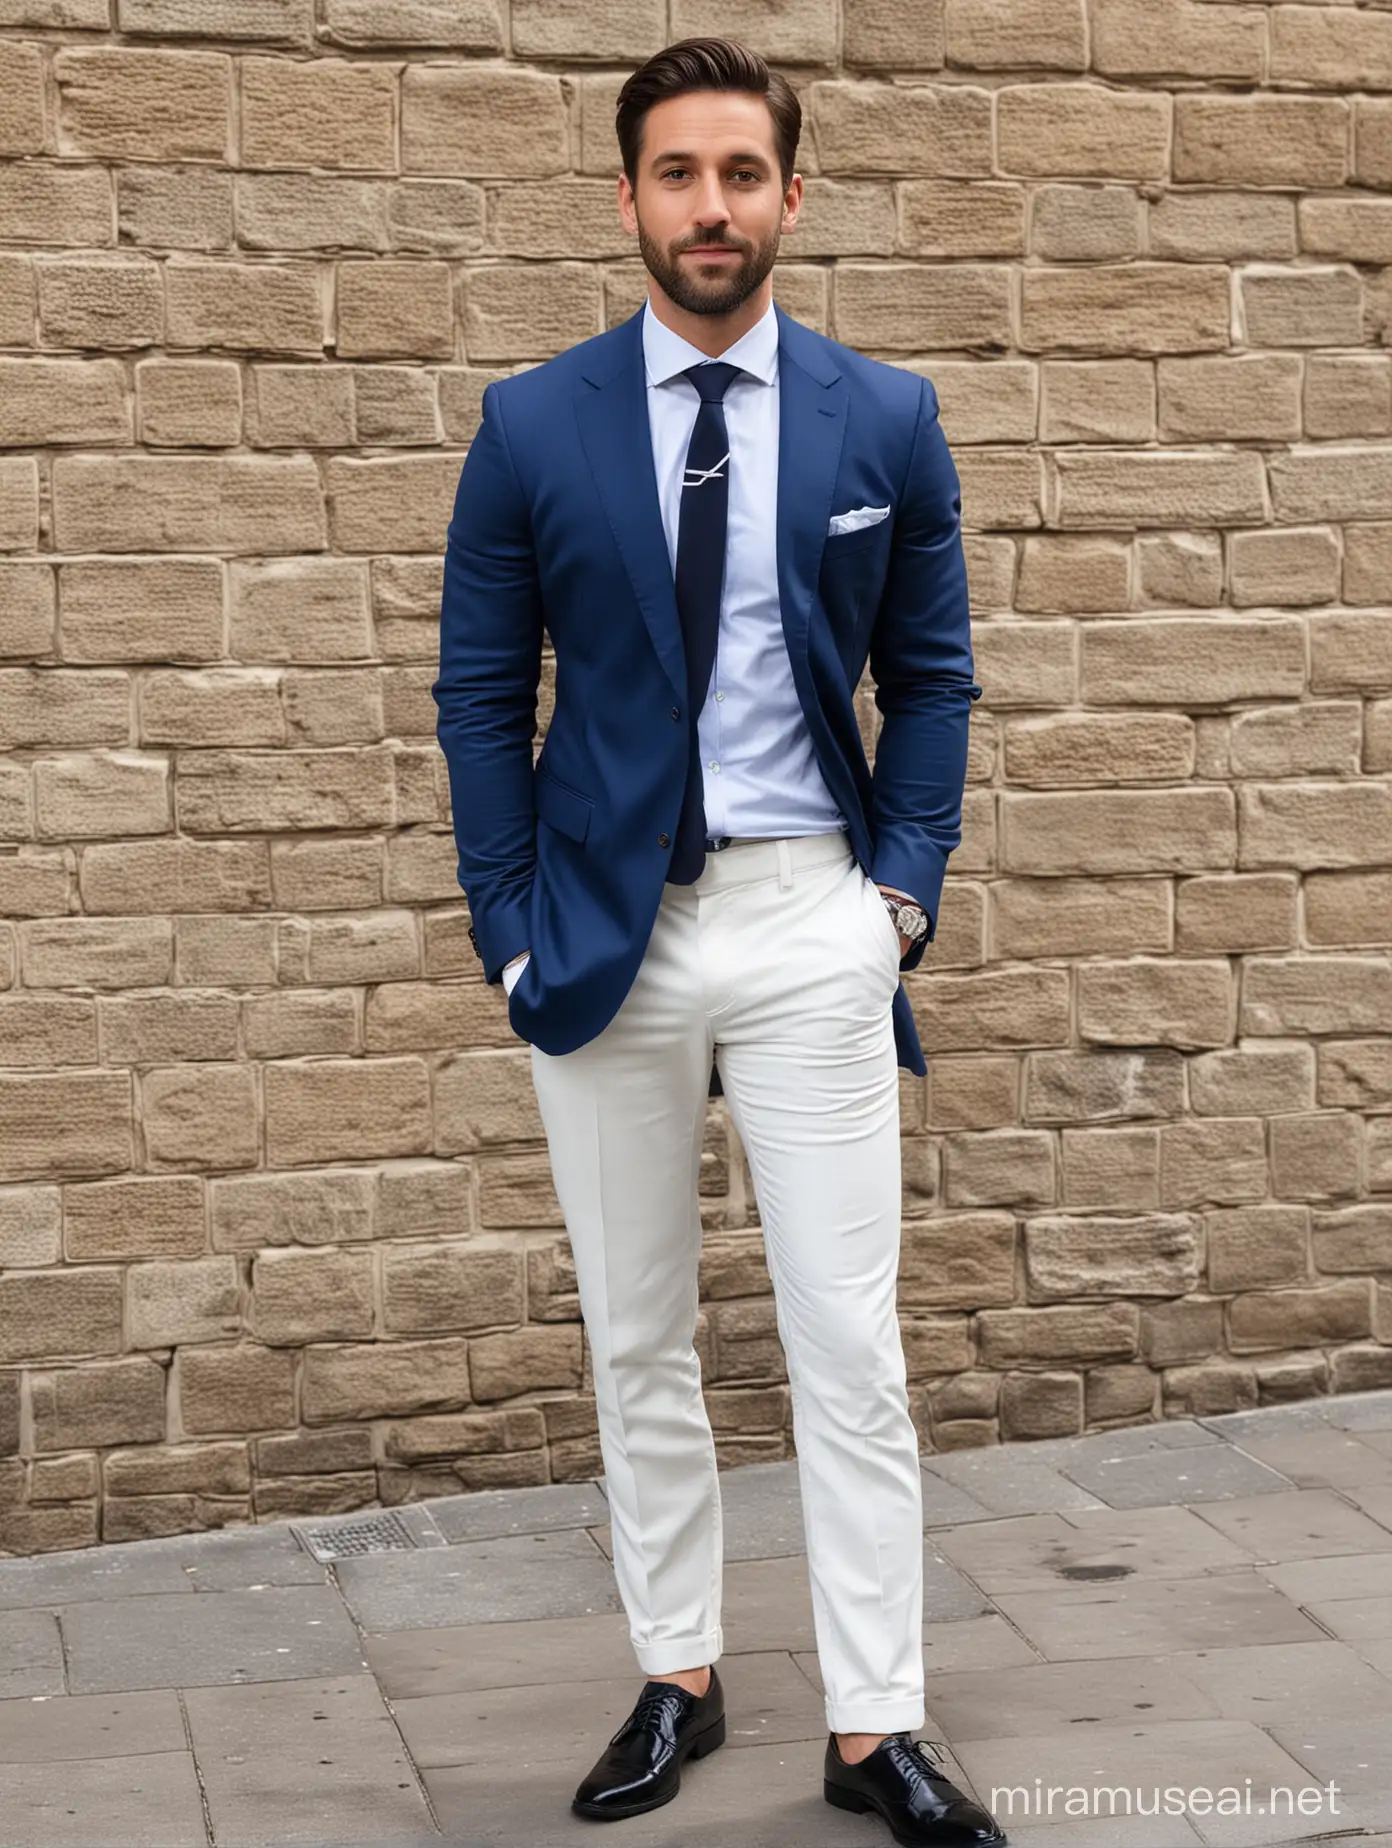 30 year old man, tv journalist, fit body, wear blue JACKET, WHITE TROUSERS, white shirt and blue tie, black shoes, , journalist, full body, head to toe
